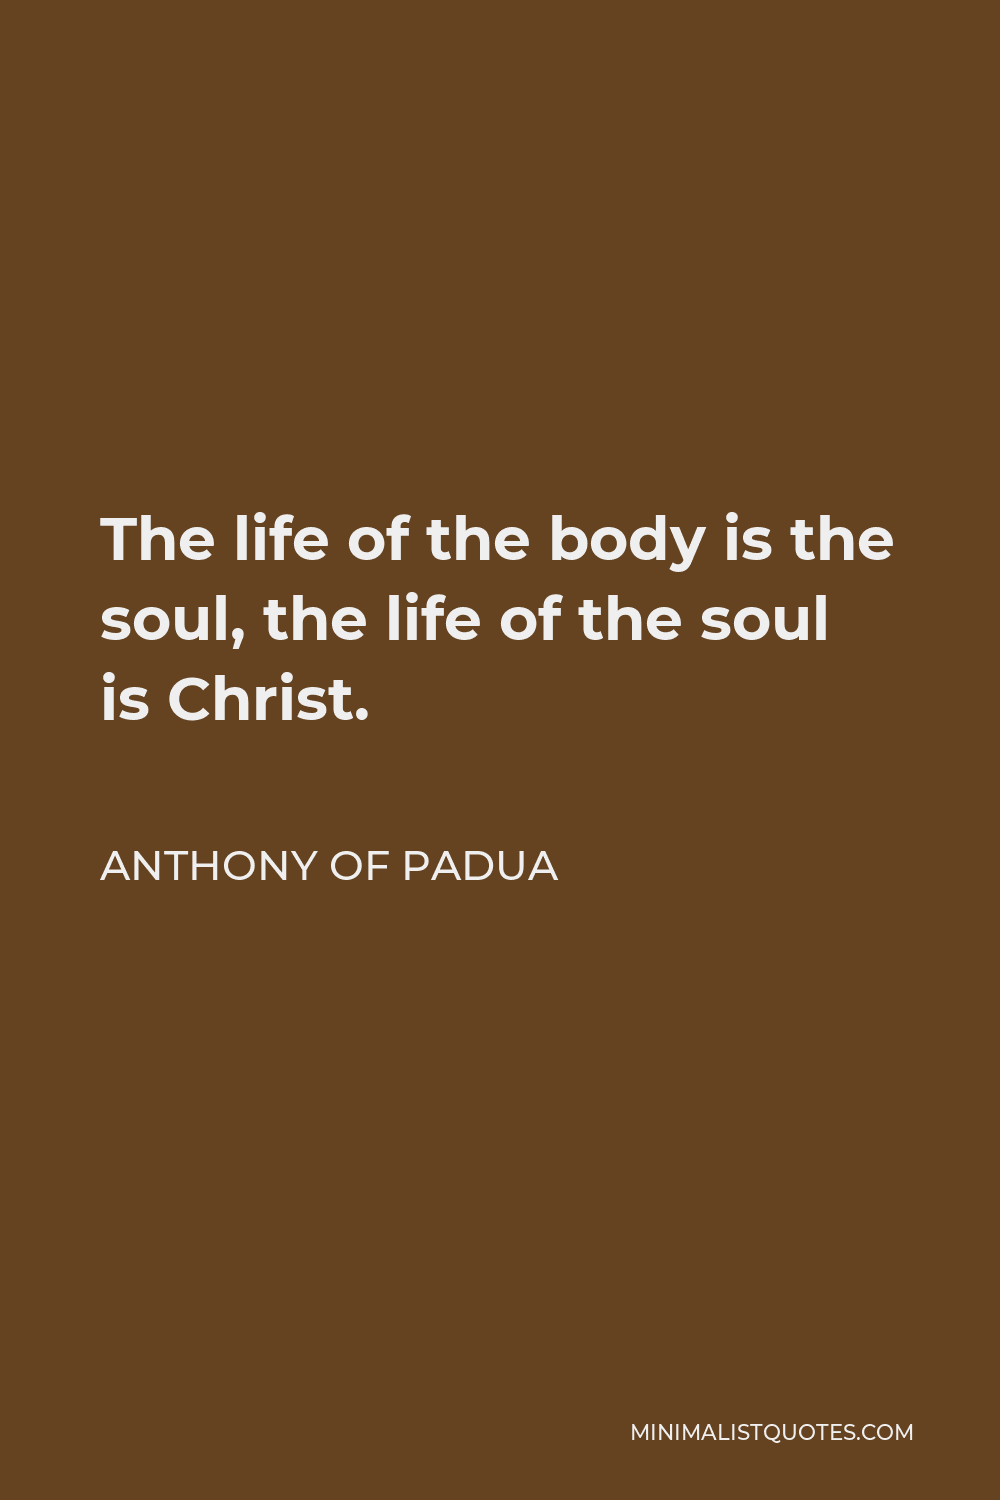 Anthony of Padua Quote - The life of the body is the soul, the life of the soul is Christ.